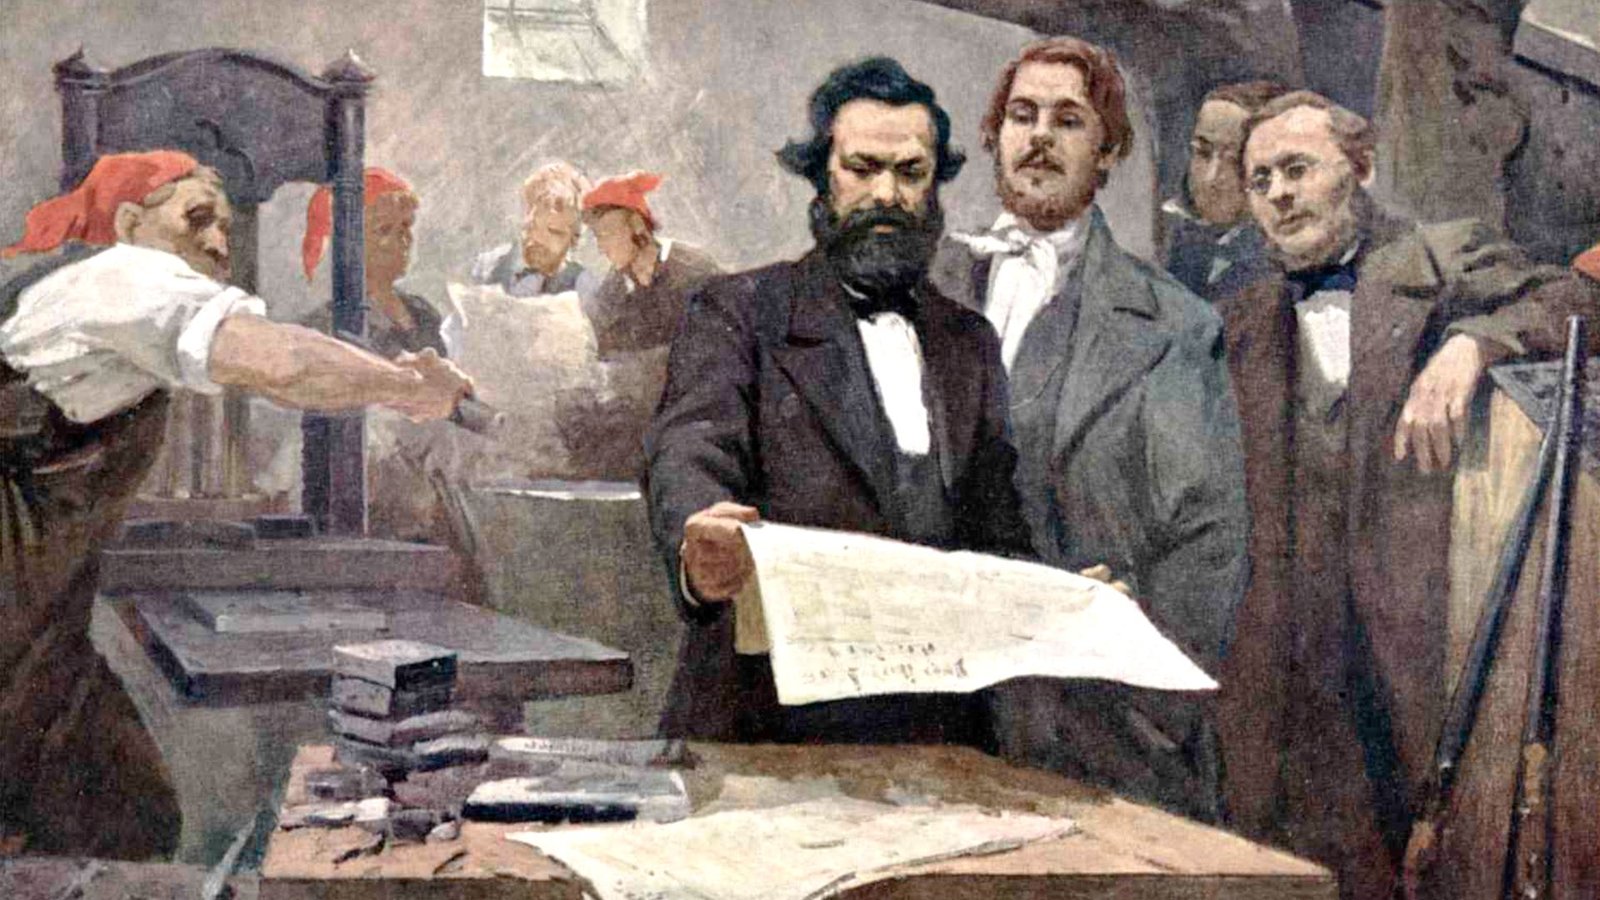 Marx and Engels: An Intellectual Partnership